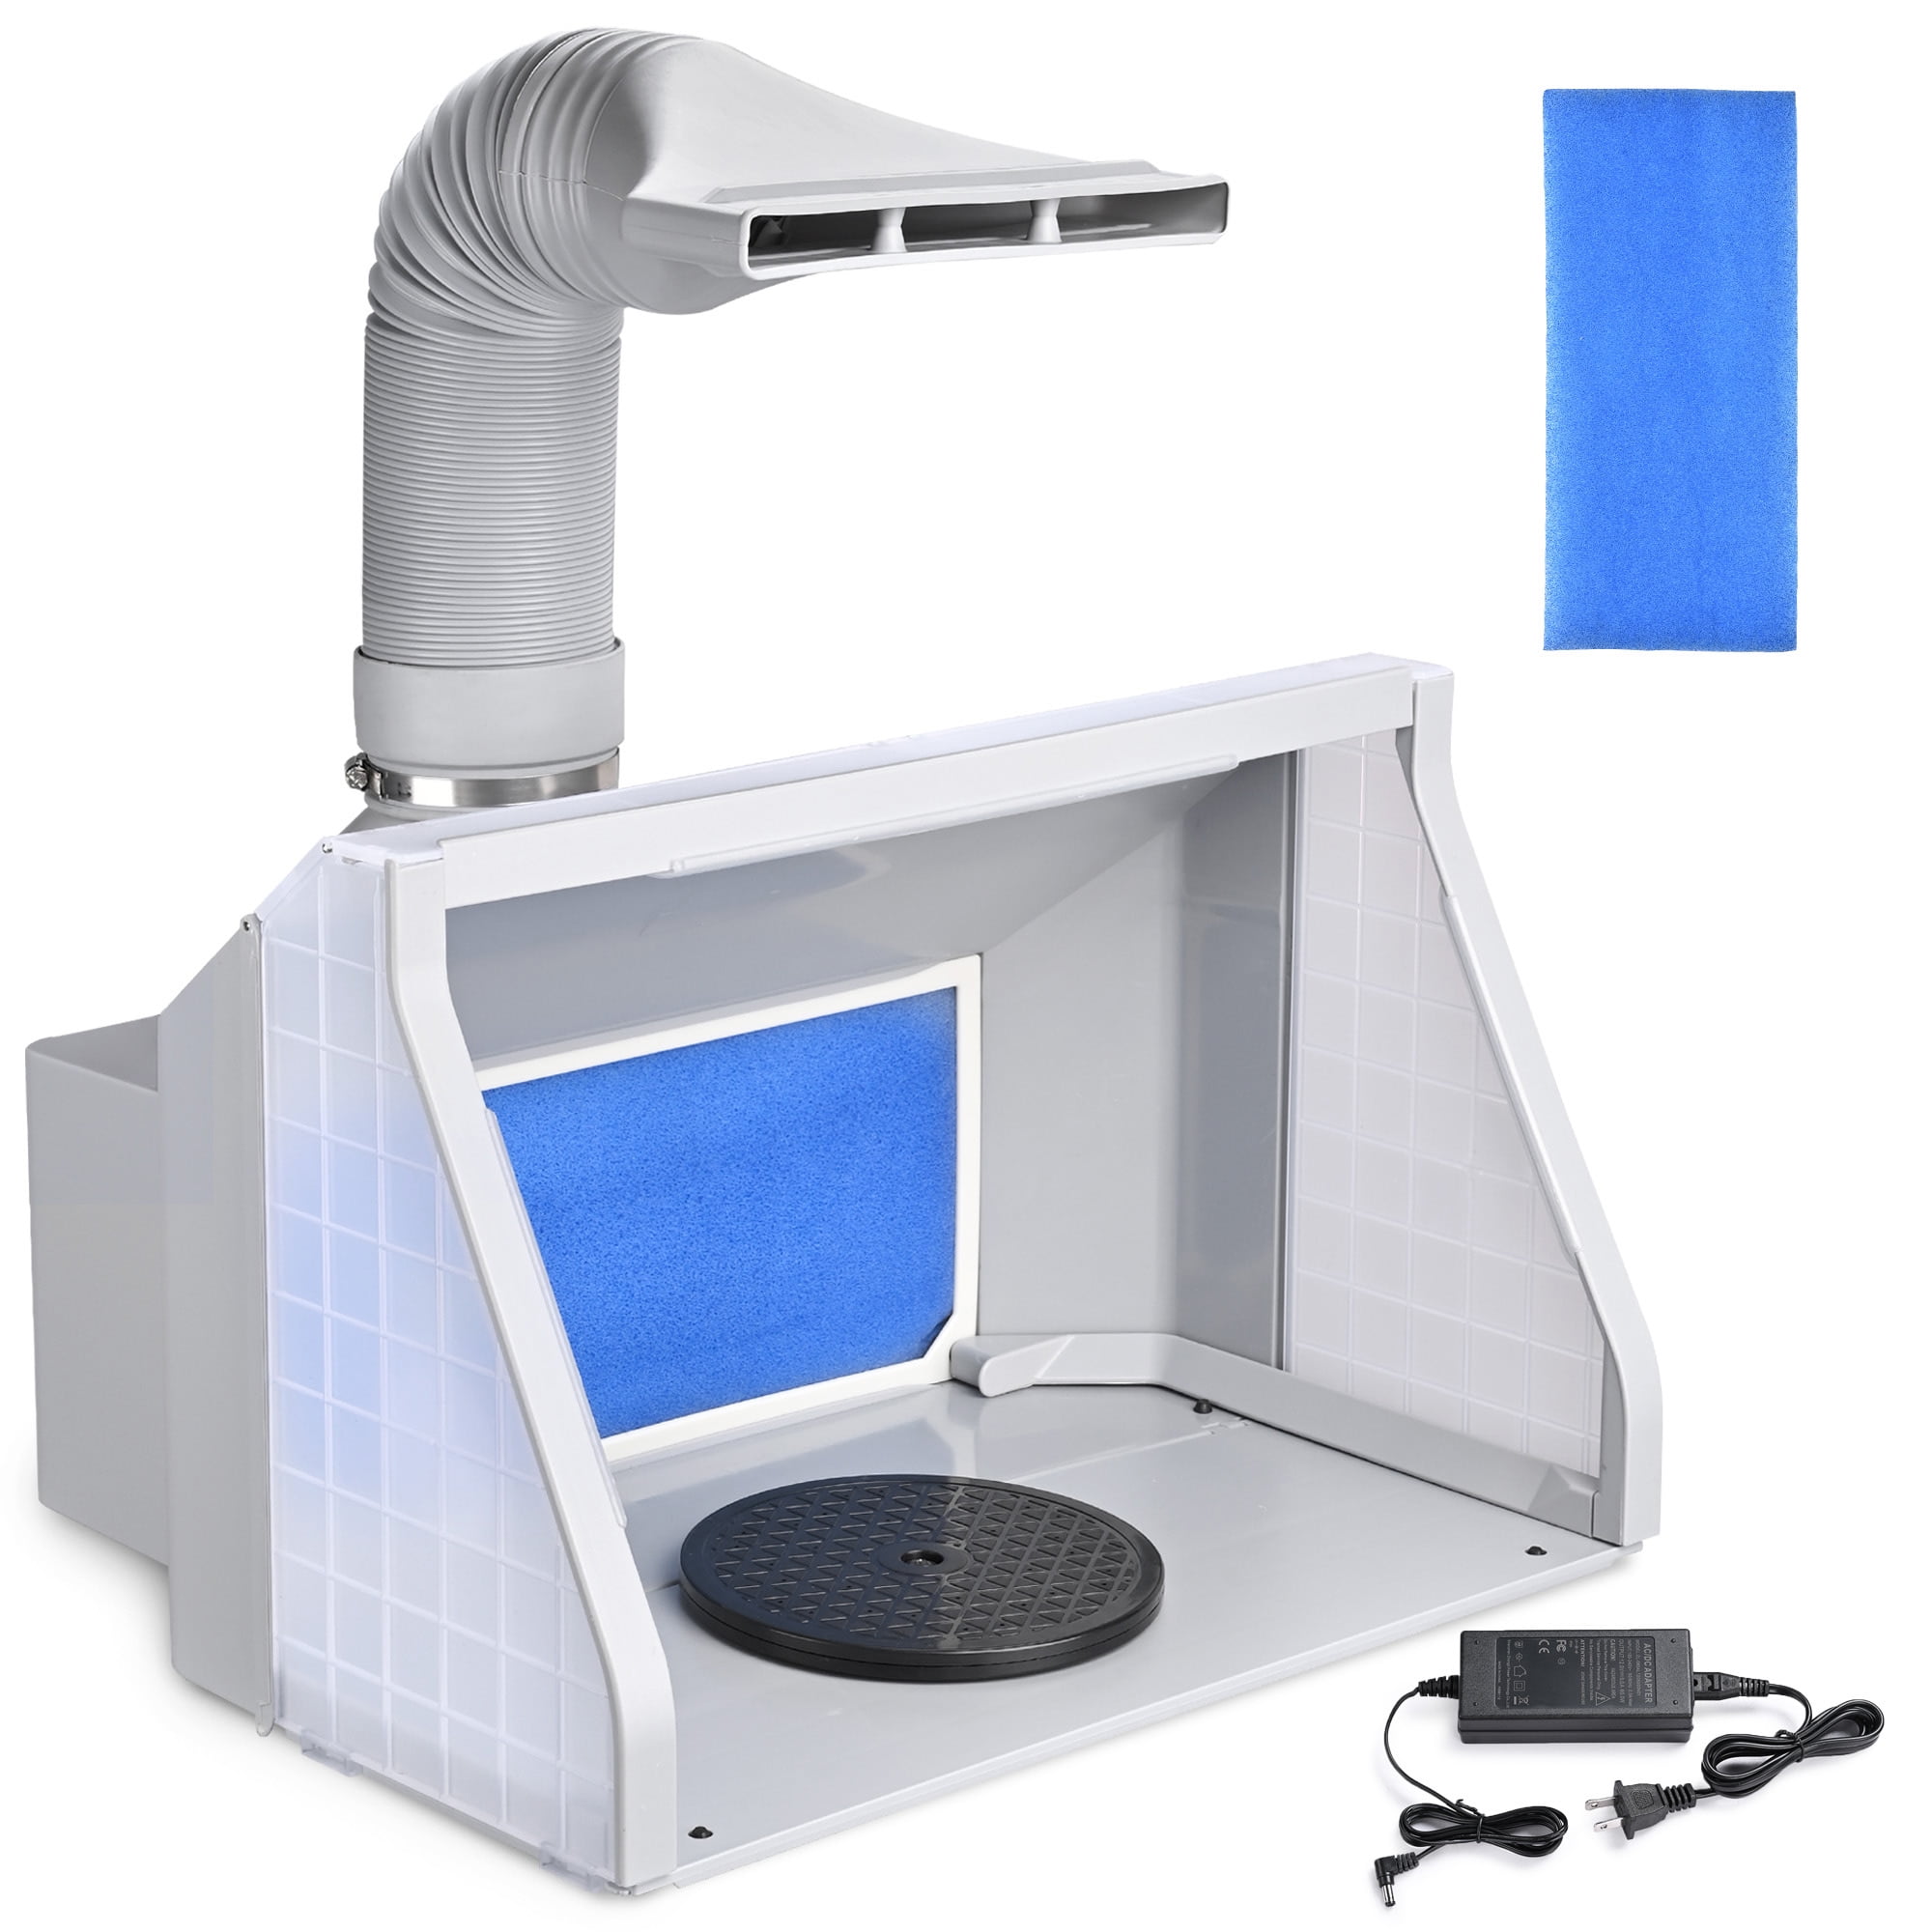 Airbrush Paint Spray Booth Kit With Exhaust Fans Filter Portable Spray Paint  Box Workbench For Airbrushing Models, Arts, Crafts - AliExpress